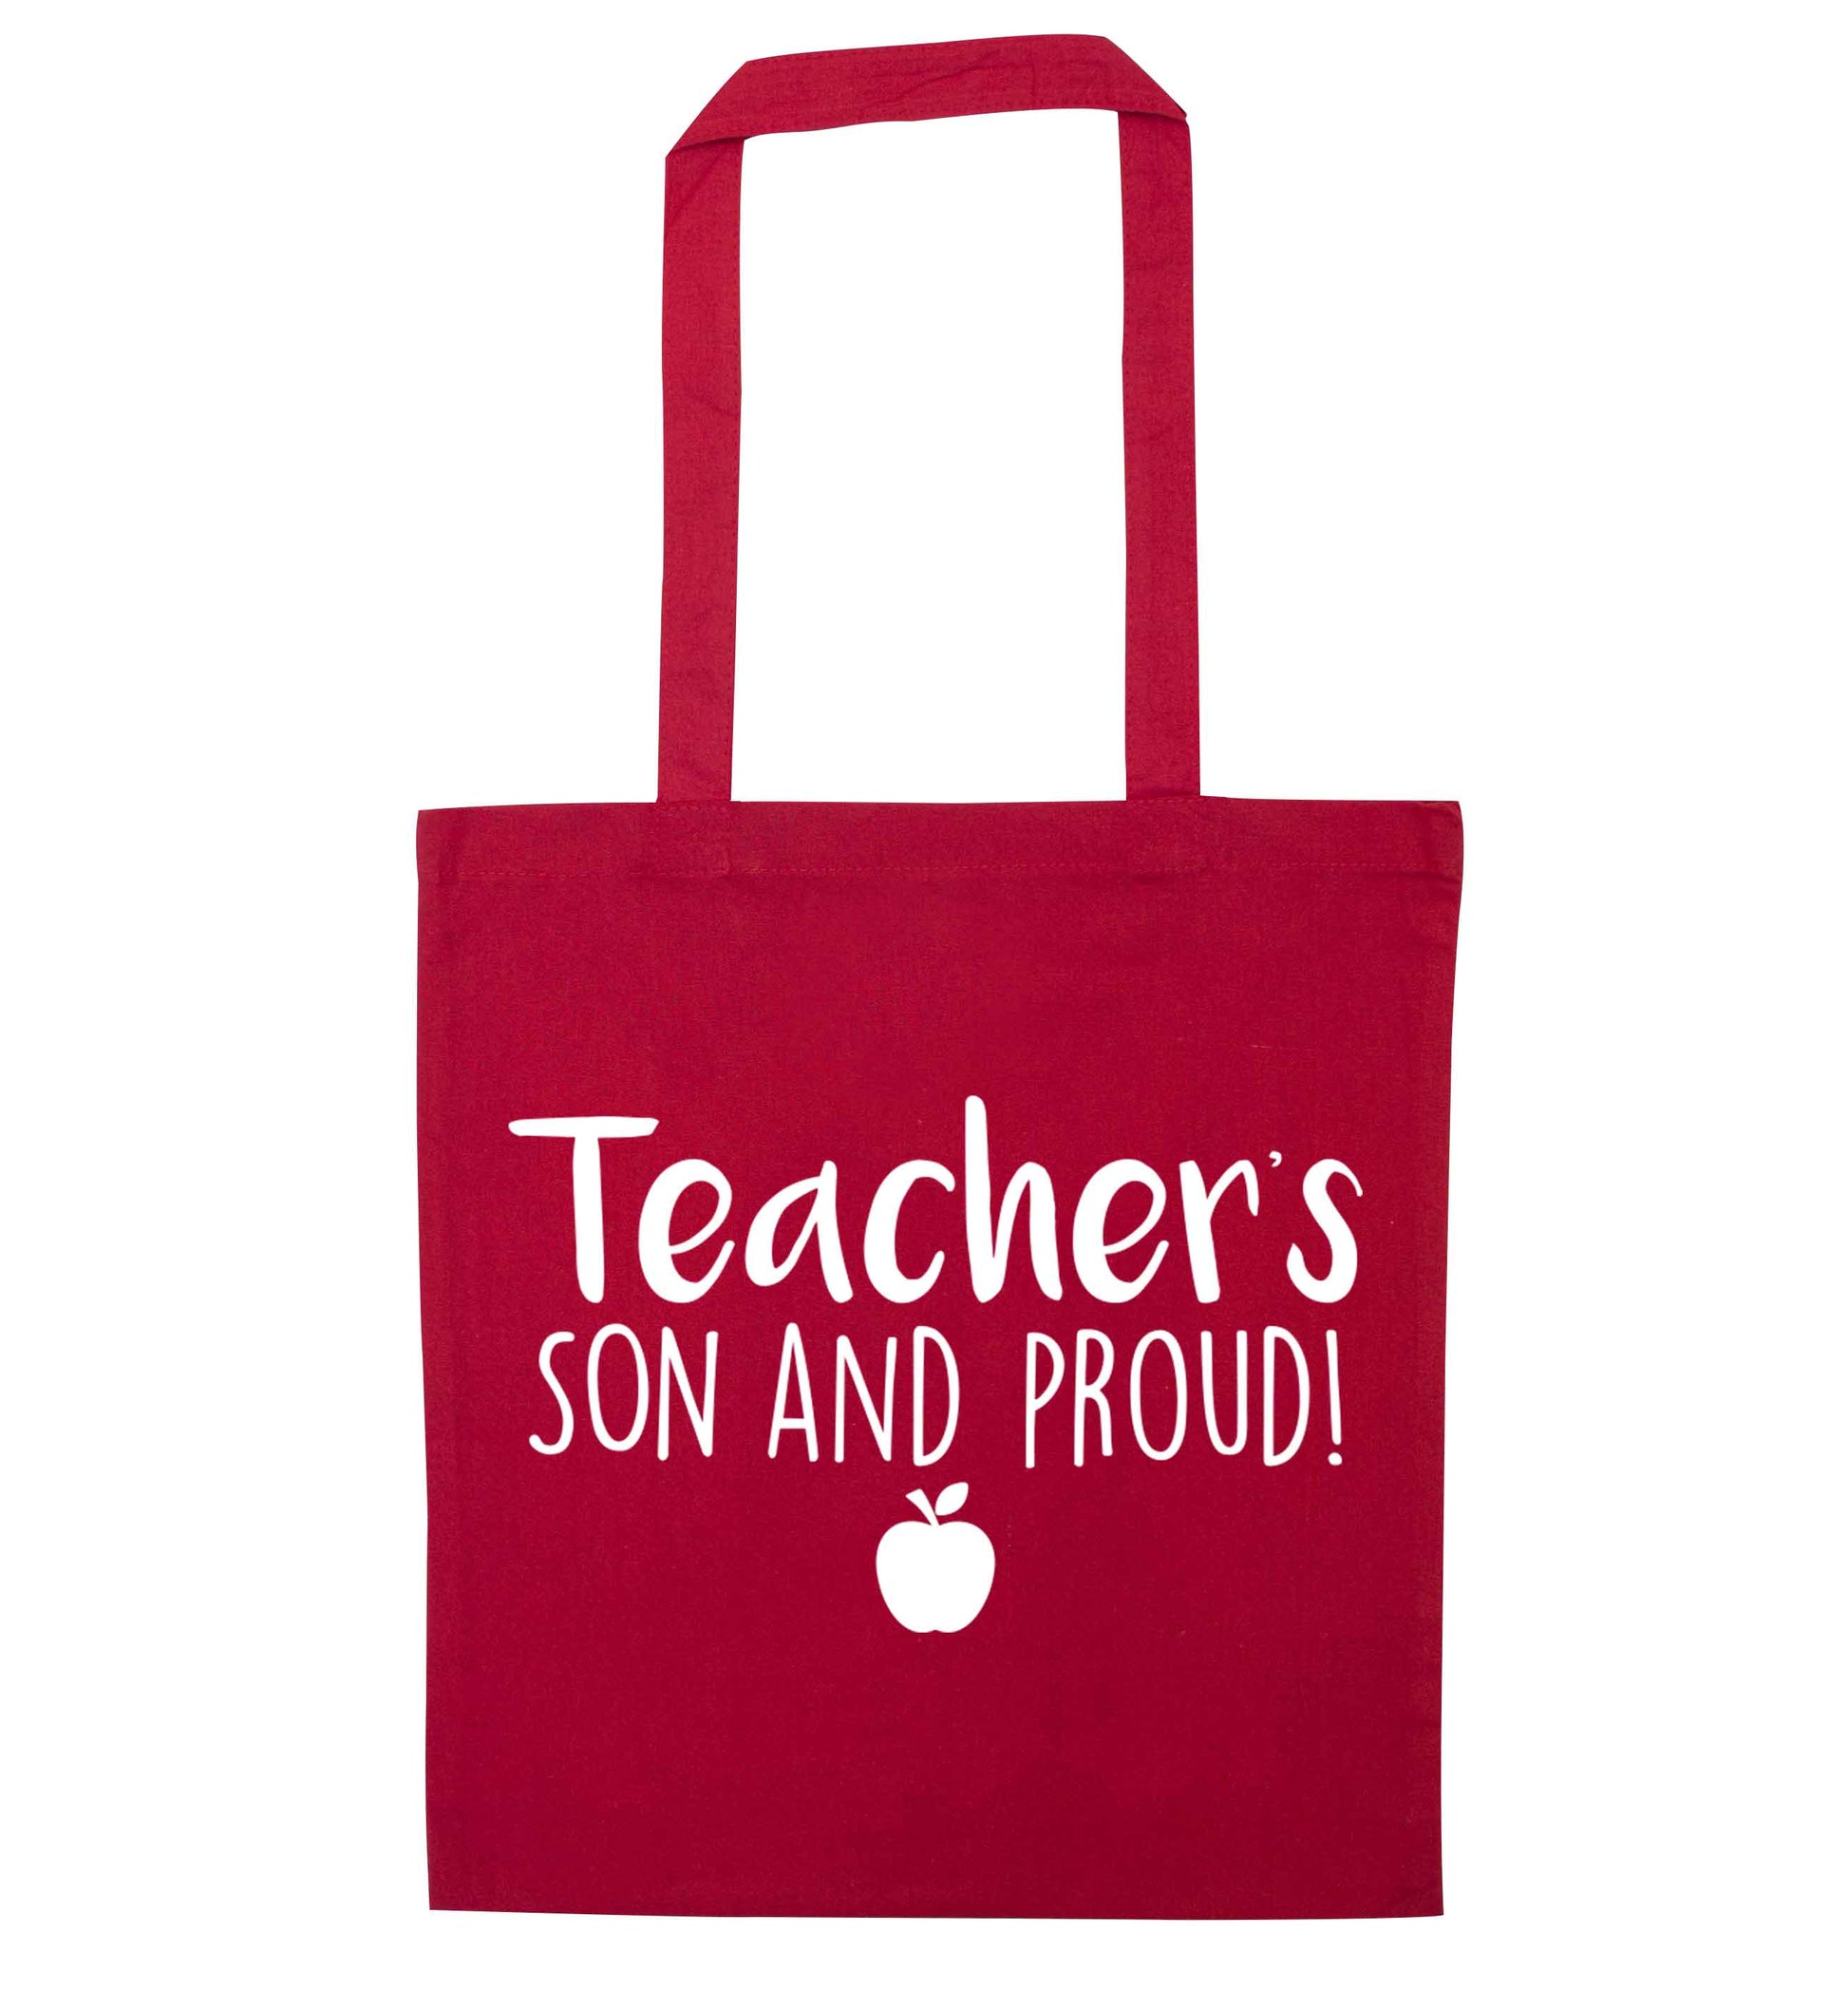 Teachers son and proud red tote bag